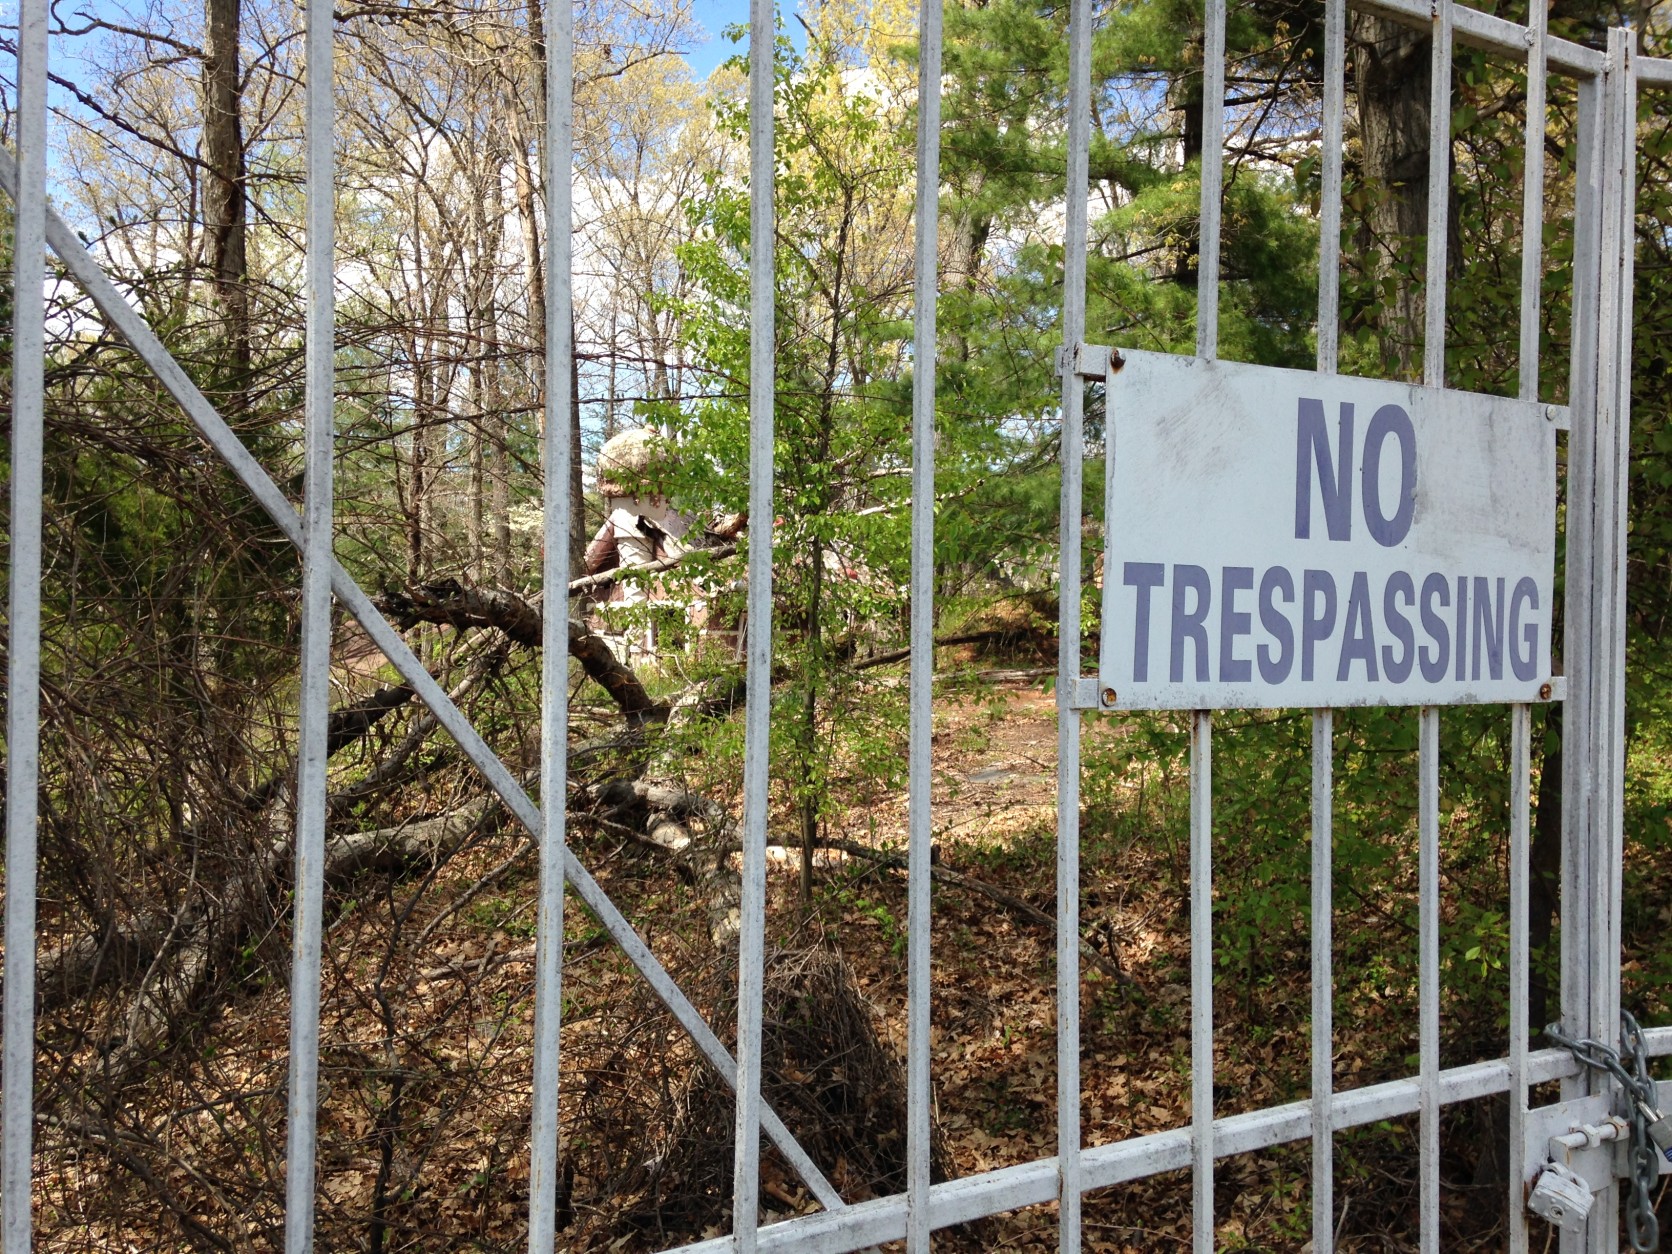 Behind the Enchanted Forest shopping center and a locked gate, you can still spot two abandoned theme park buildings through the trees. (WTOP/Michelle Basch)